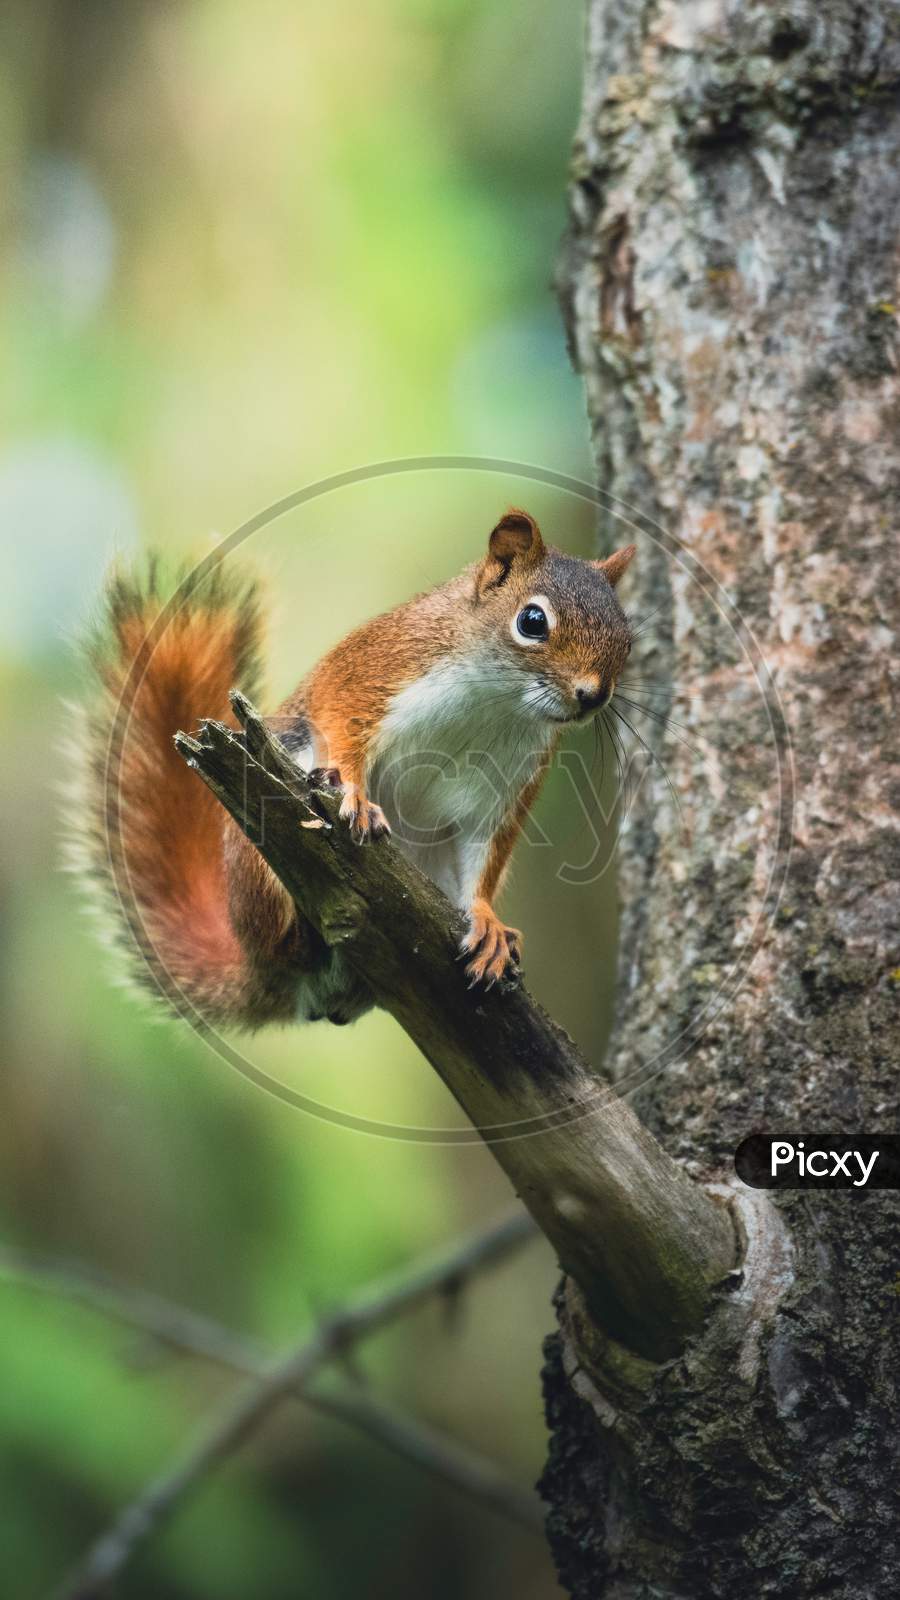 The Brown Squirrel Is Perched On A Tree Branch